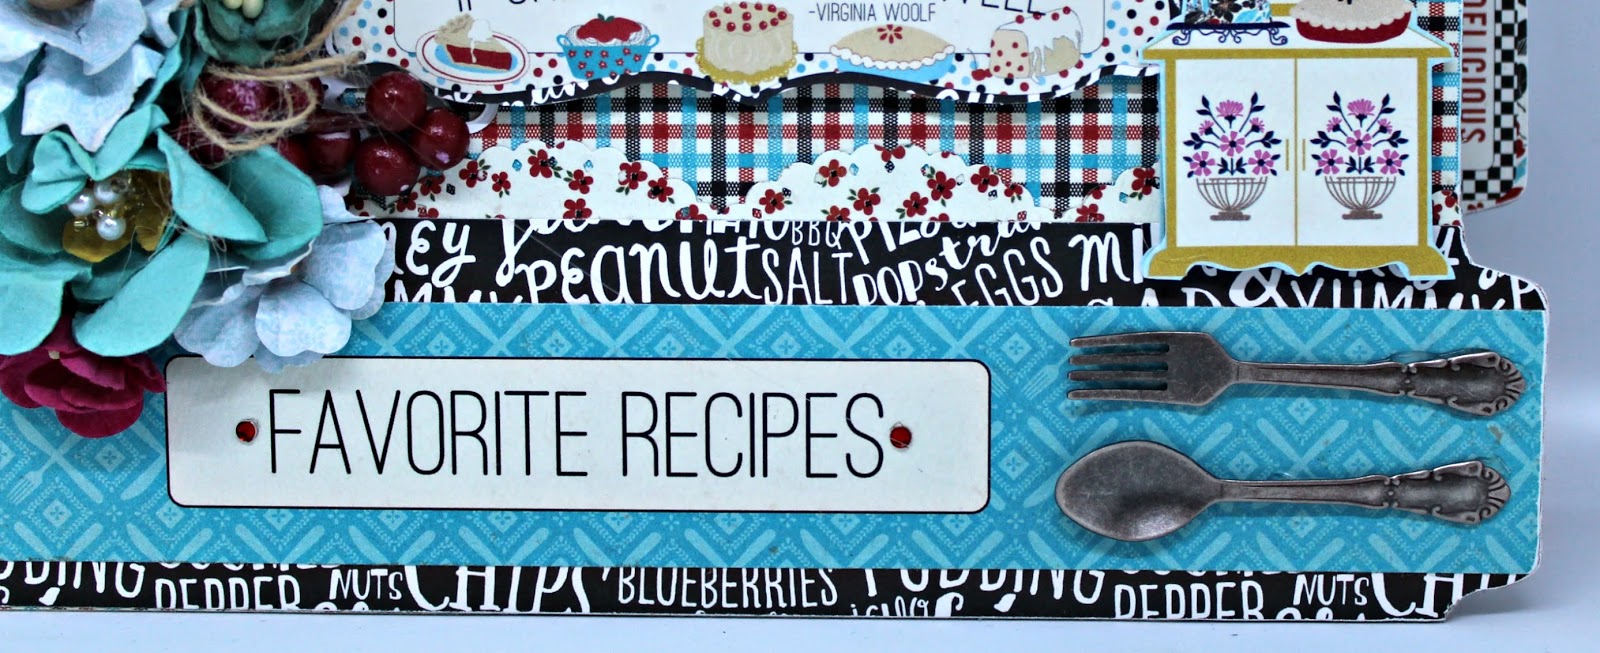 Pam Bray Designs: A Girl with Flair: Homemade Recipe Book With Authentique